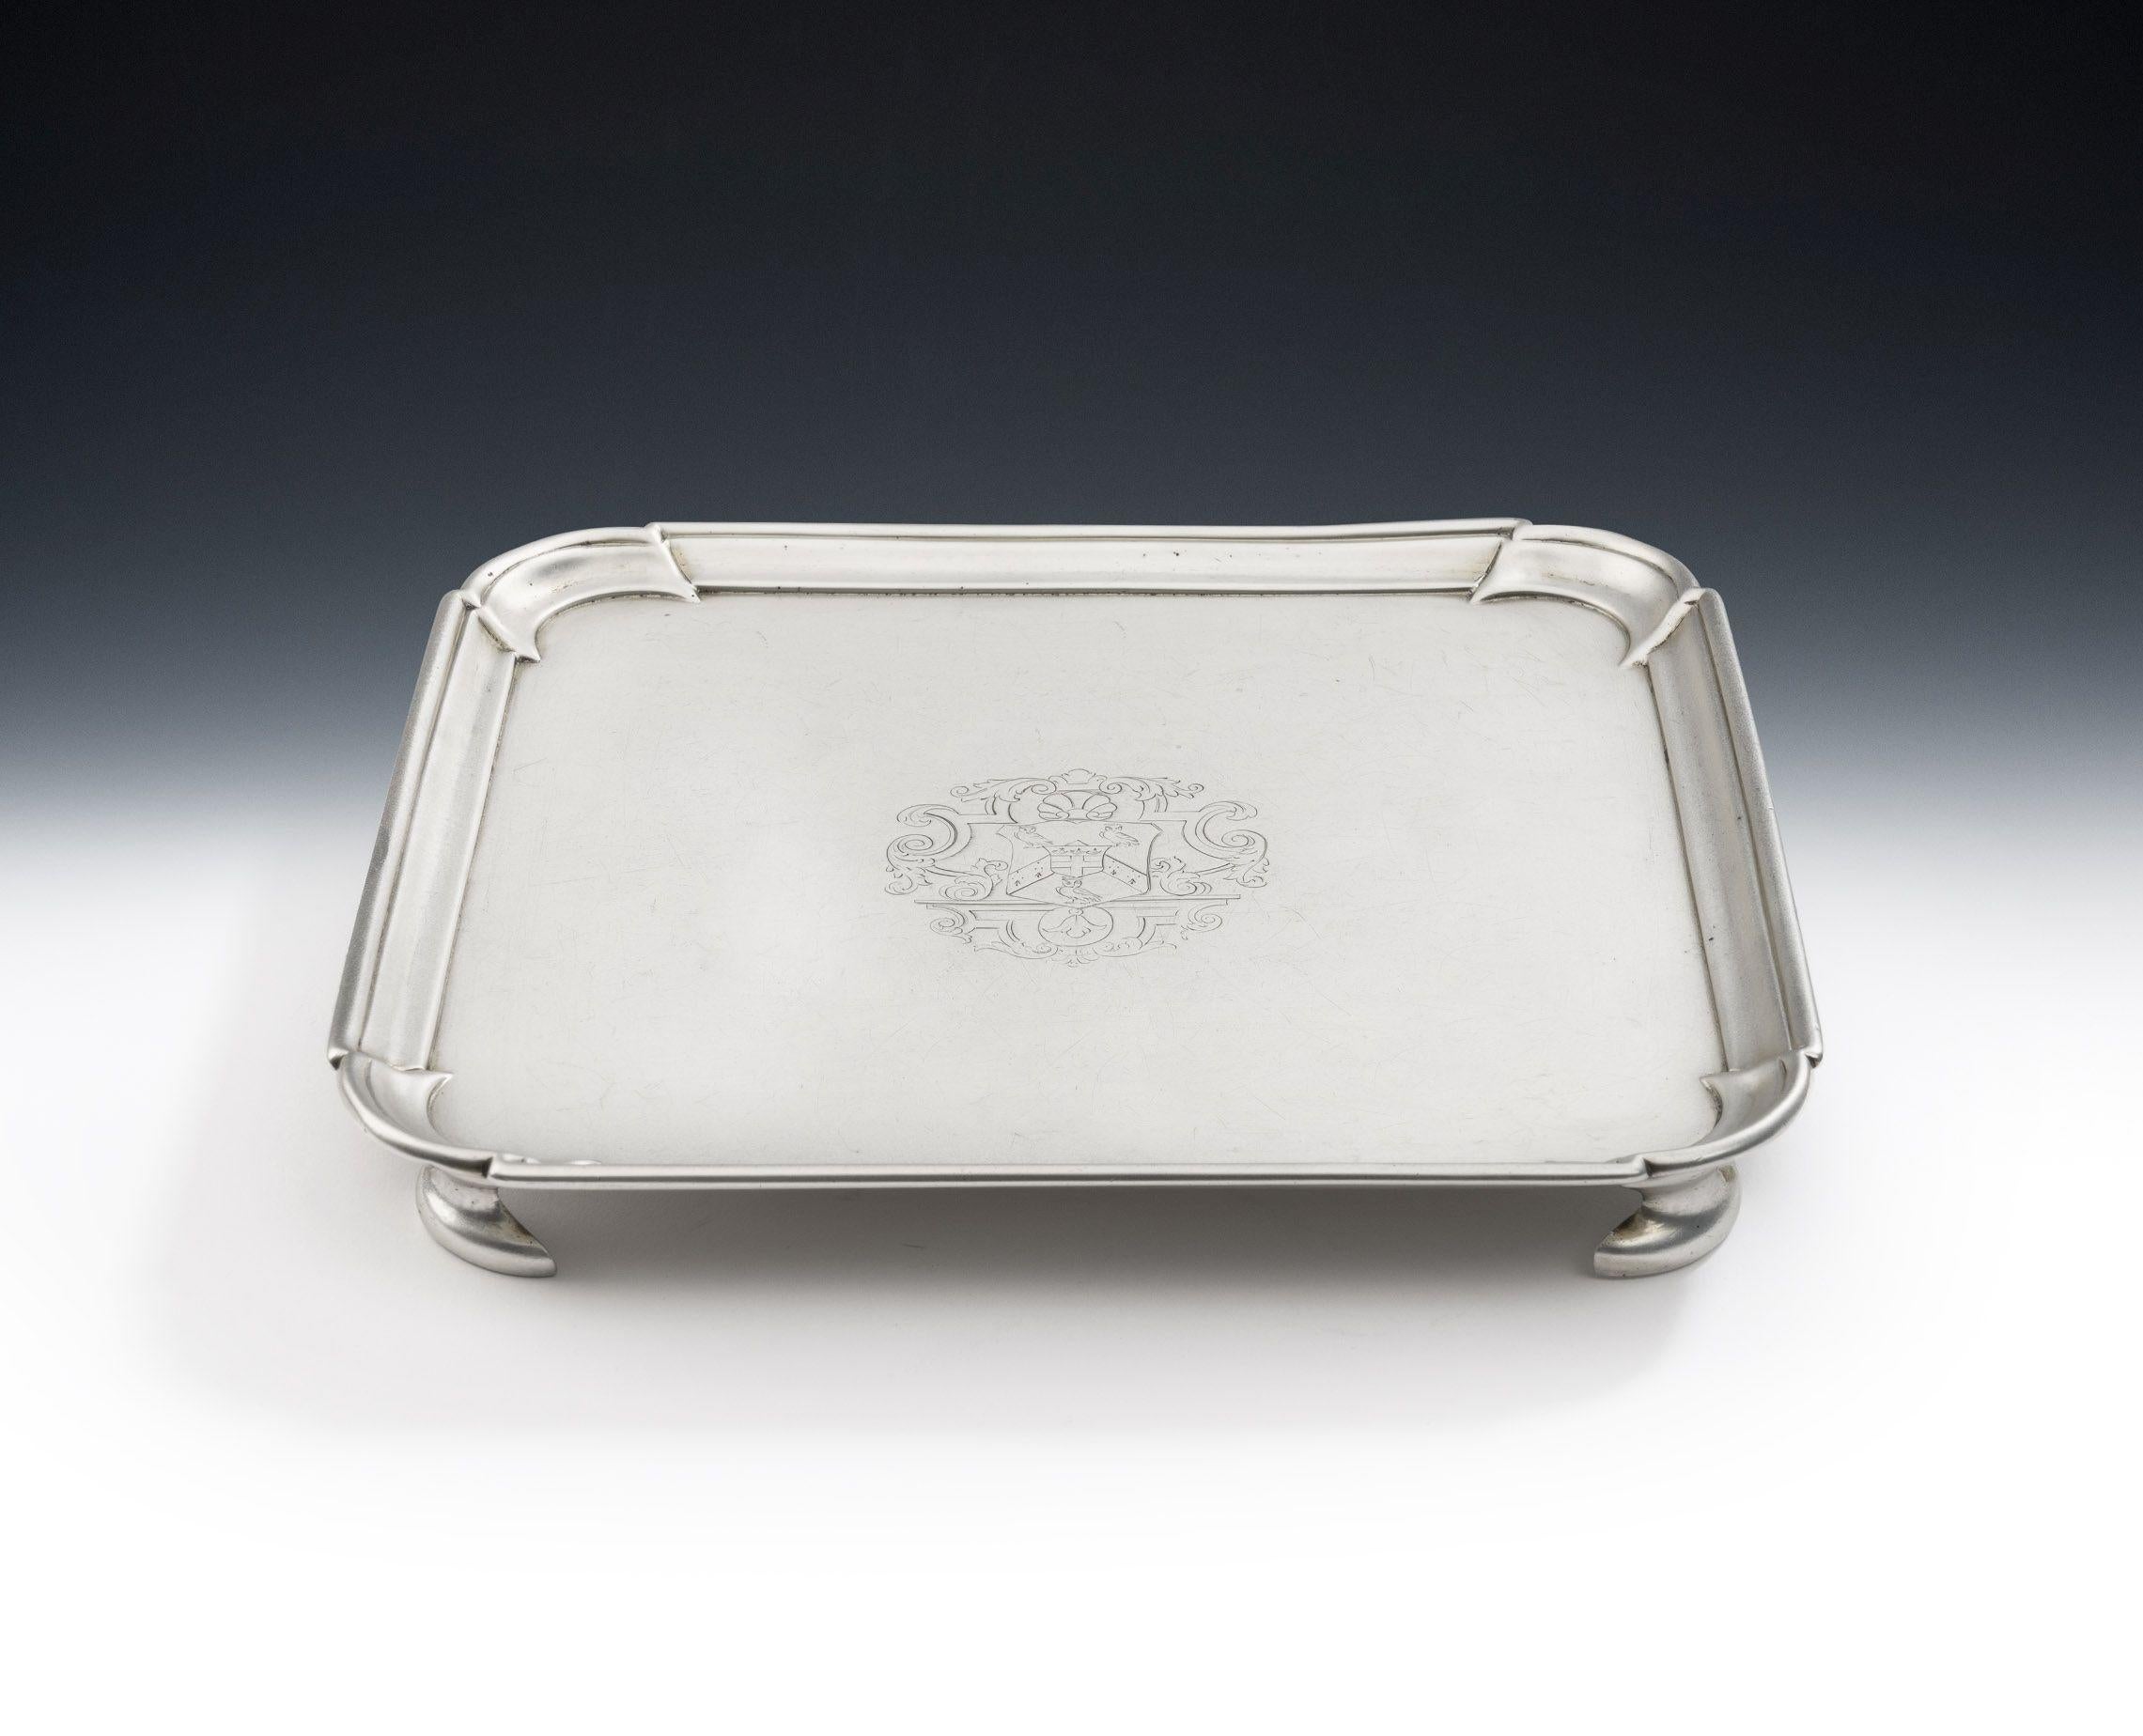 A very fine George II Square Salver made in London in 1729 by Matthew Cooper I

The Salver stands on four unusual shaped cast feet and the raised, stepped, rim displays incuse corners.  The centre is engraved with a contemporary Armorial surrounded